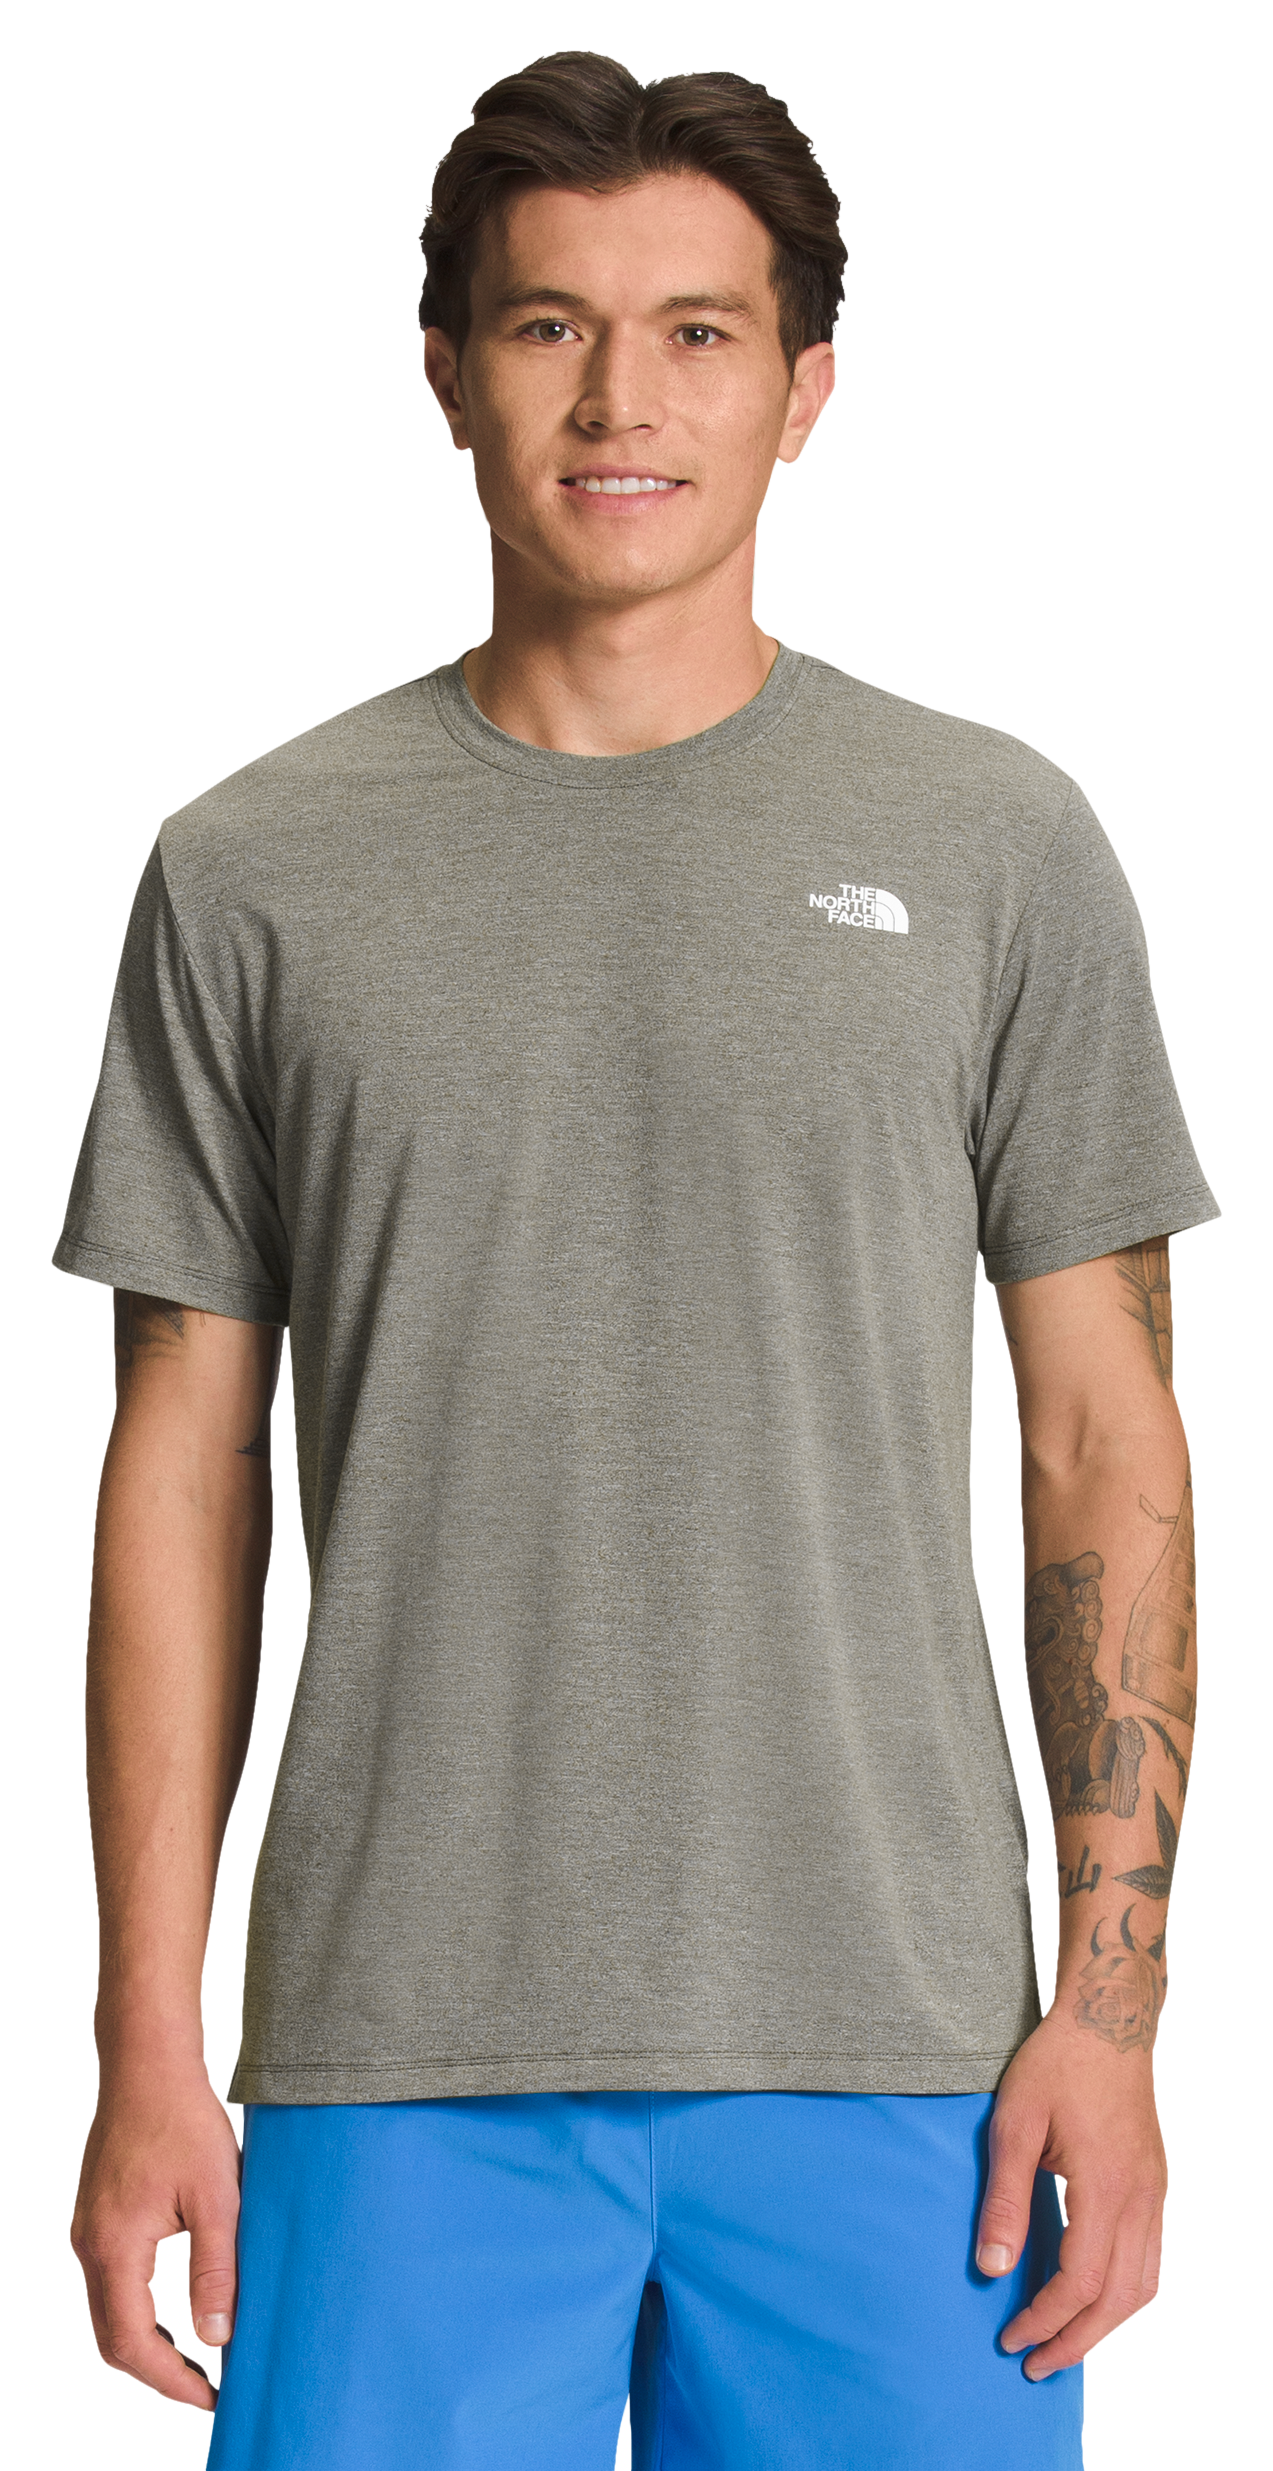 The North Face Wander Short-Sleeve Shirt for Men - New Taupe Green Heather - L